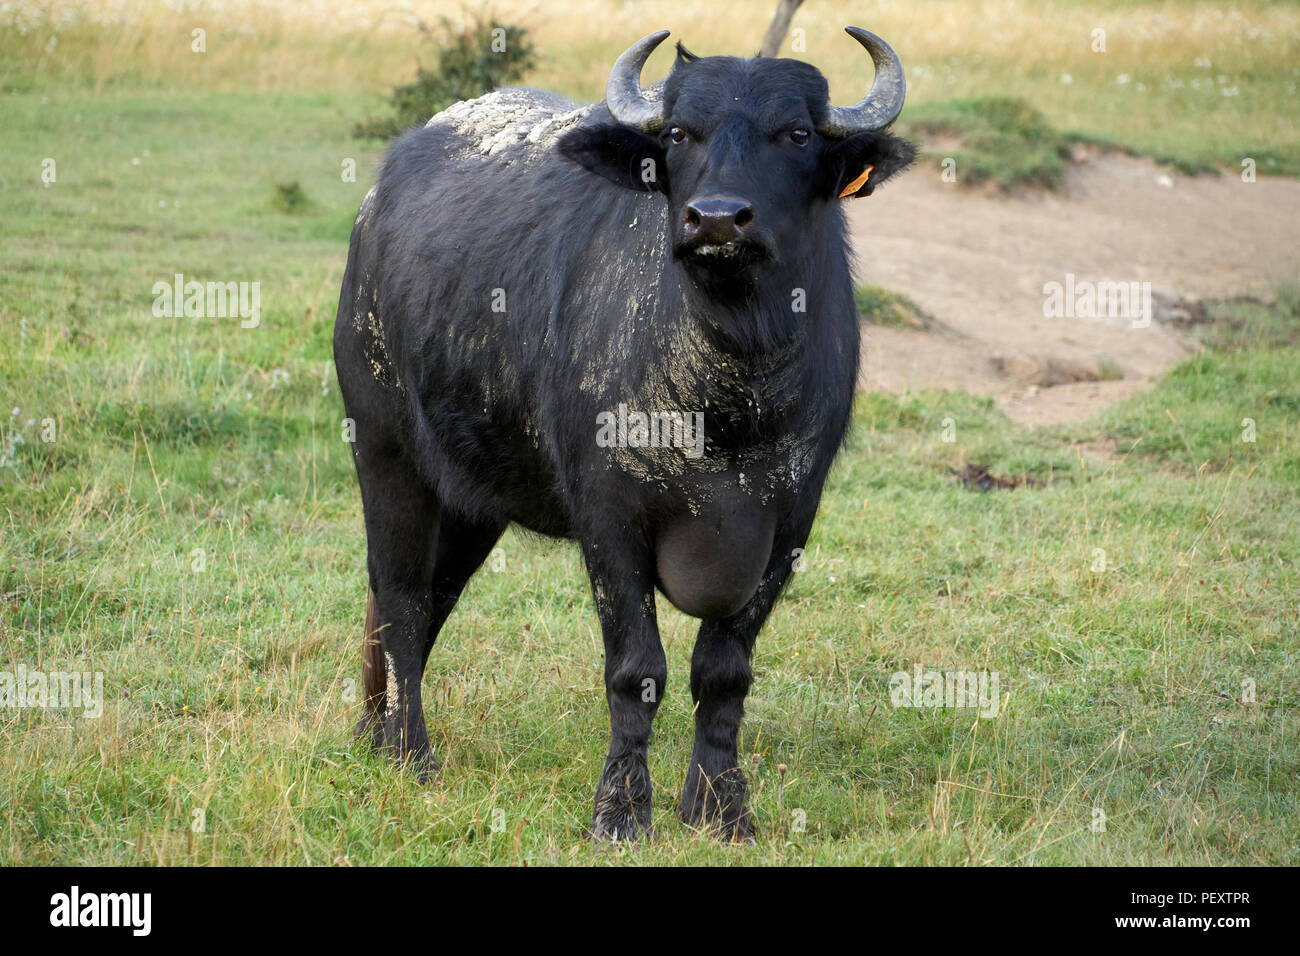 European water buffalo reintroduction for ecological restoration and rewilding, conservation, wildlife management, ranger Stock Photo